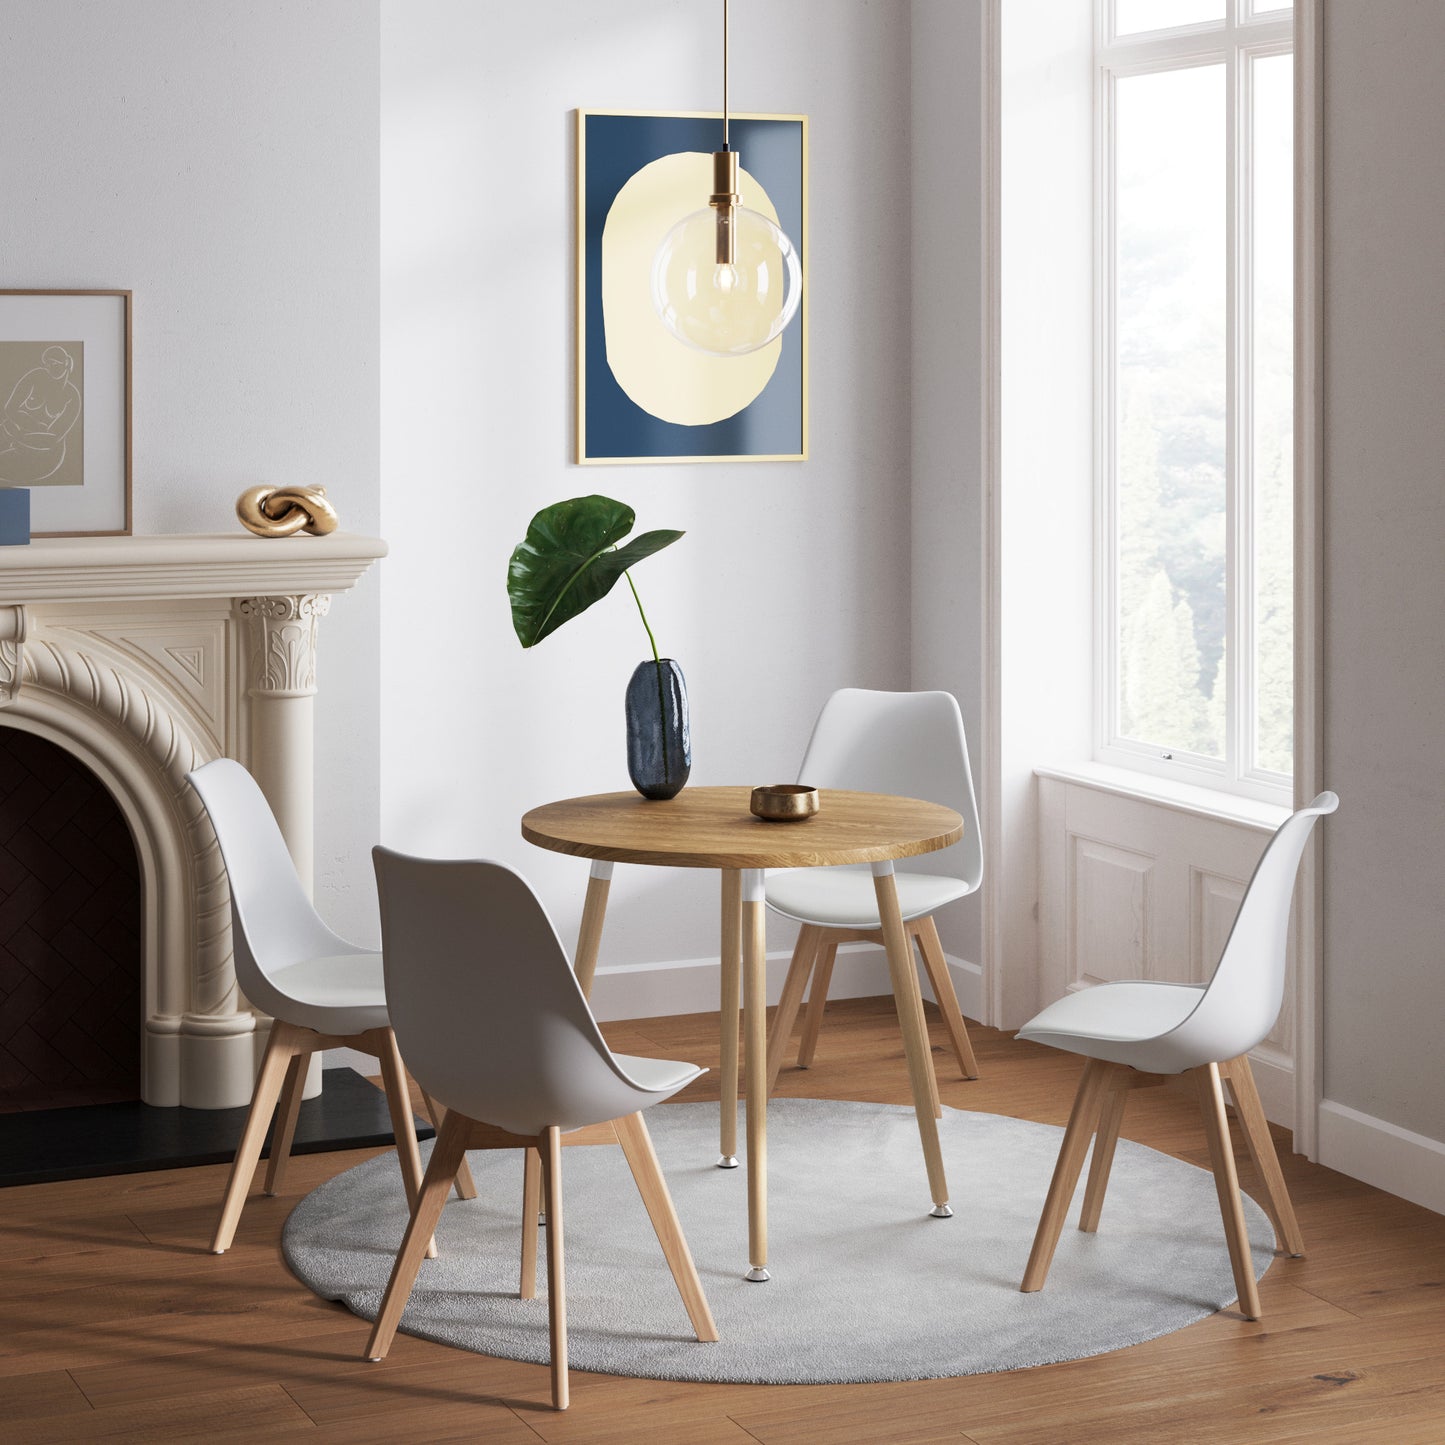 CHOTTO - Ando Dining Chairs - White x 4